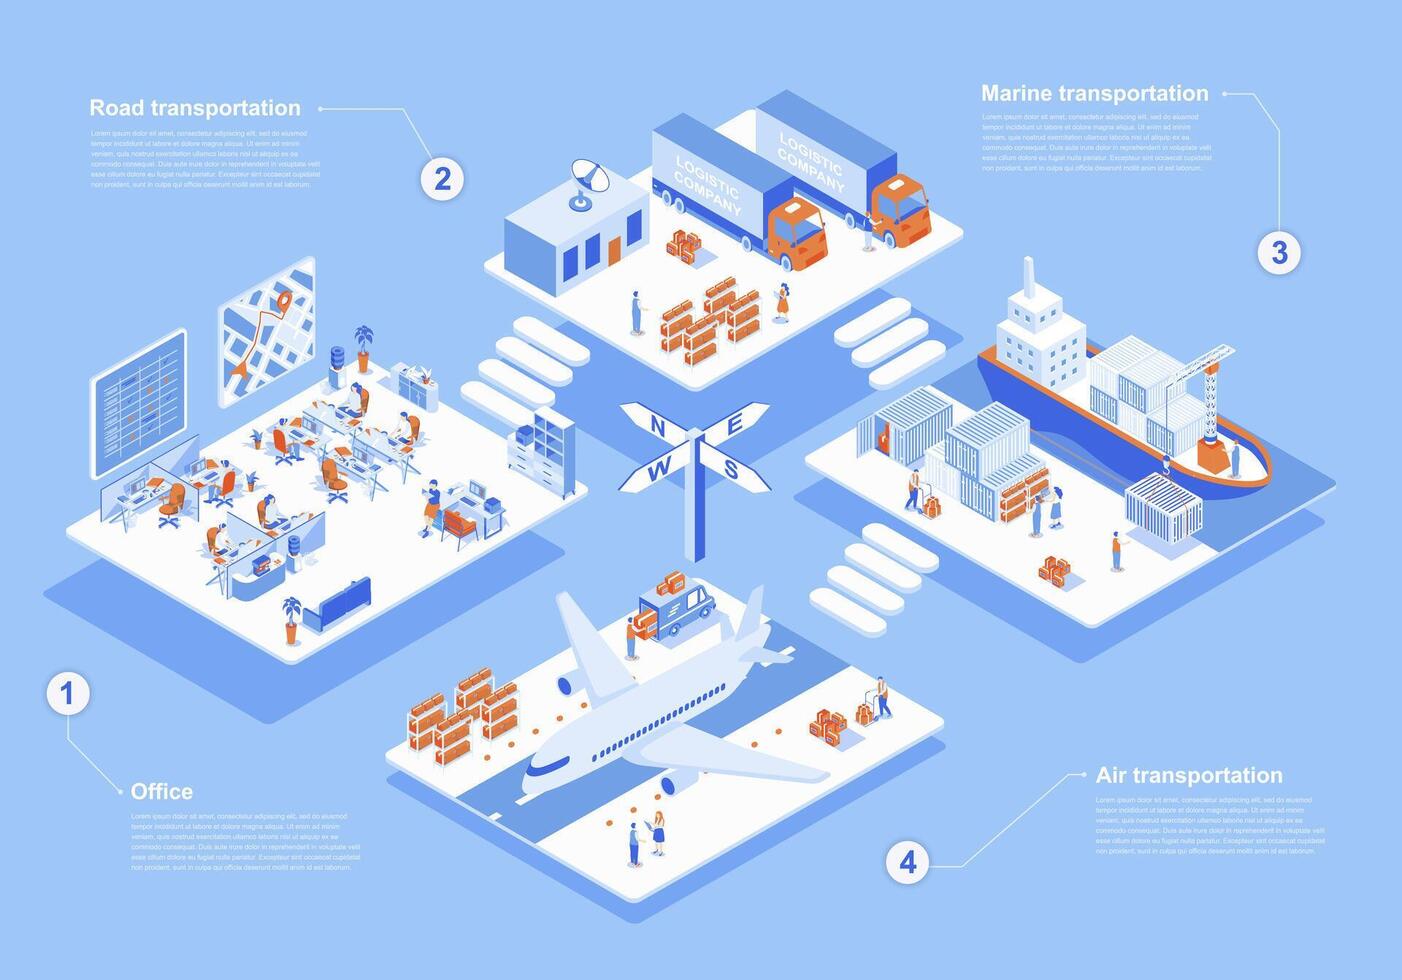 Logistic company concept 3d isometric web scene with infographic. People working in delivery office and provide road, marine and air transportations. Vector illustration in isometry graphic design